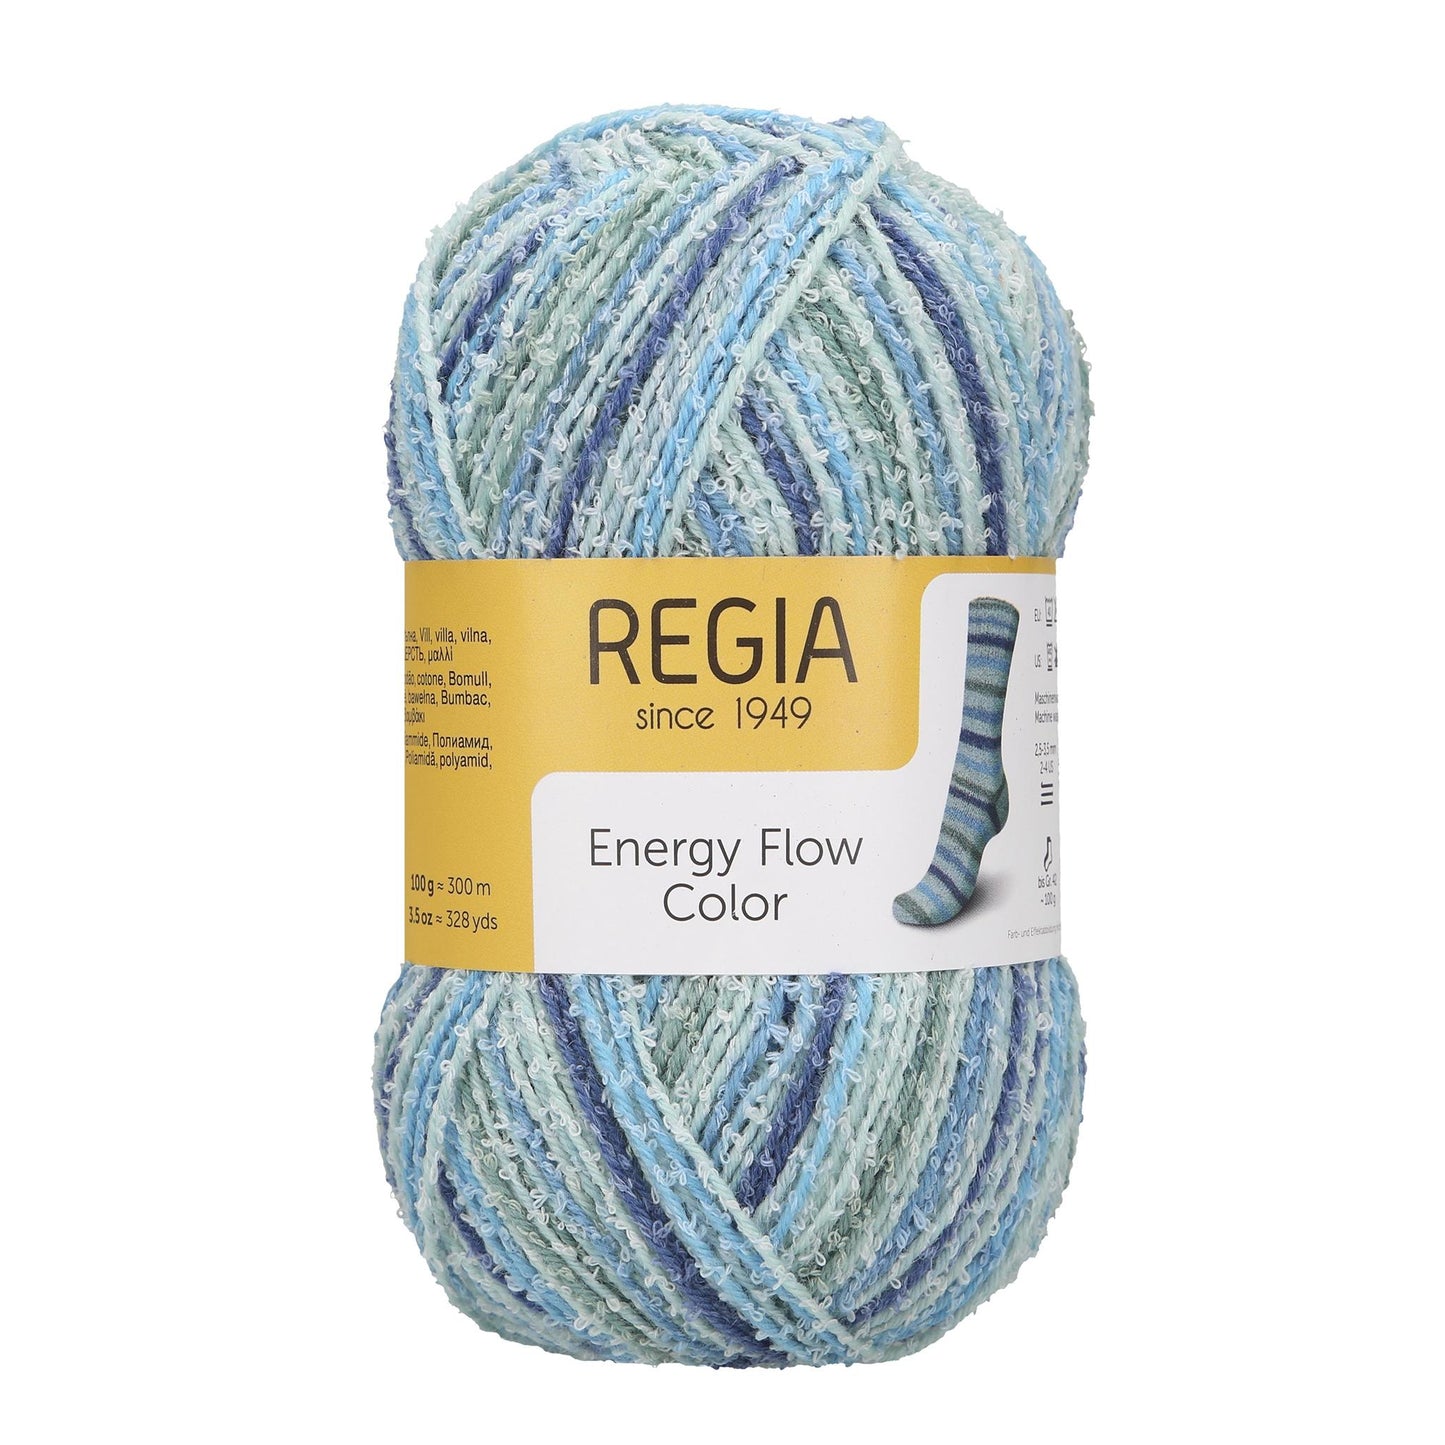 Regia Energy Flow 4fädig 100g, 90639, Farbe relax color 181